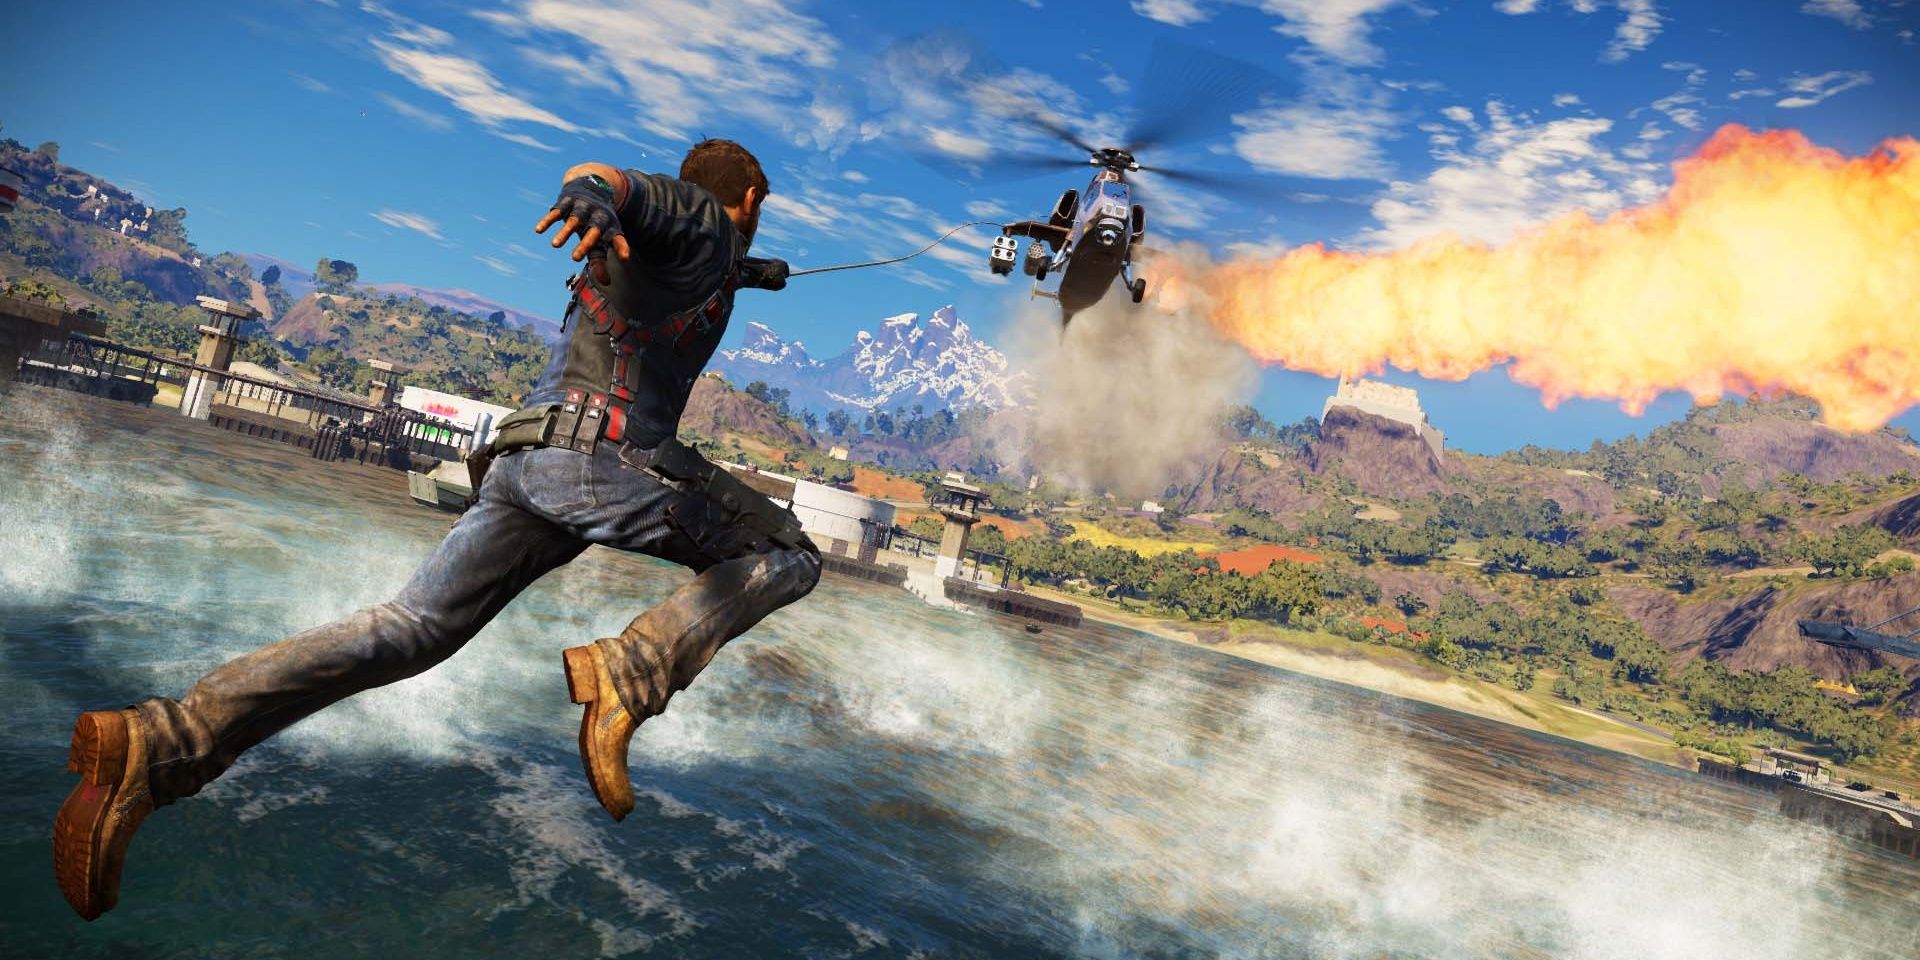 Rico Rodriguez grapples a burning helicopter in Just Cause 3 in Medici.